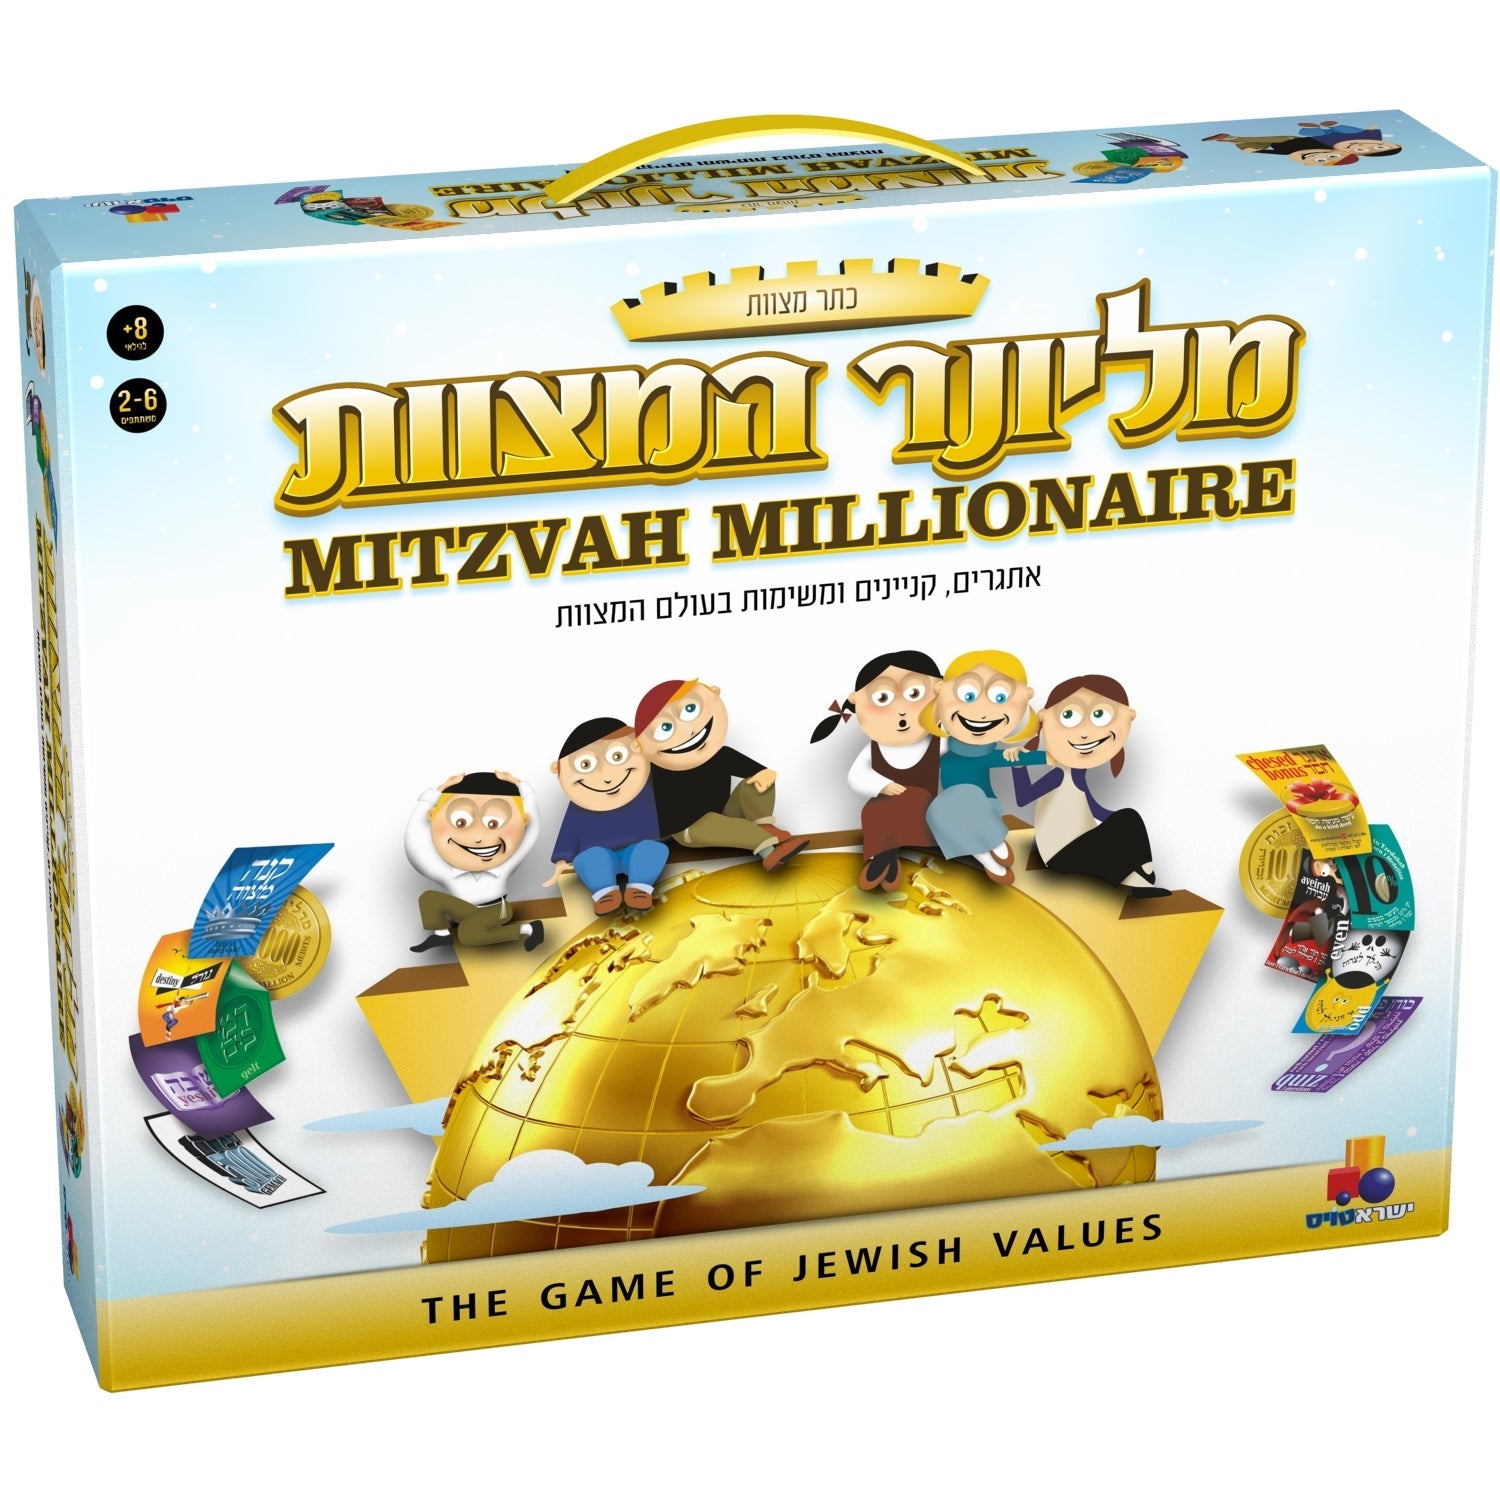 A millionaire of Mitzvos